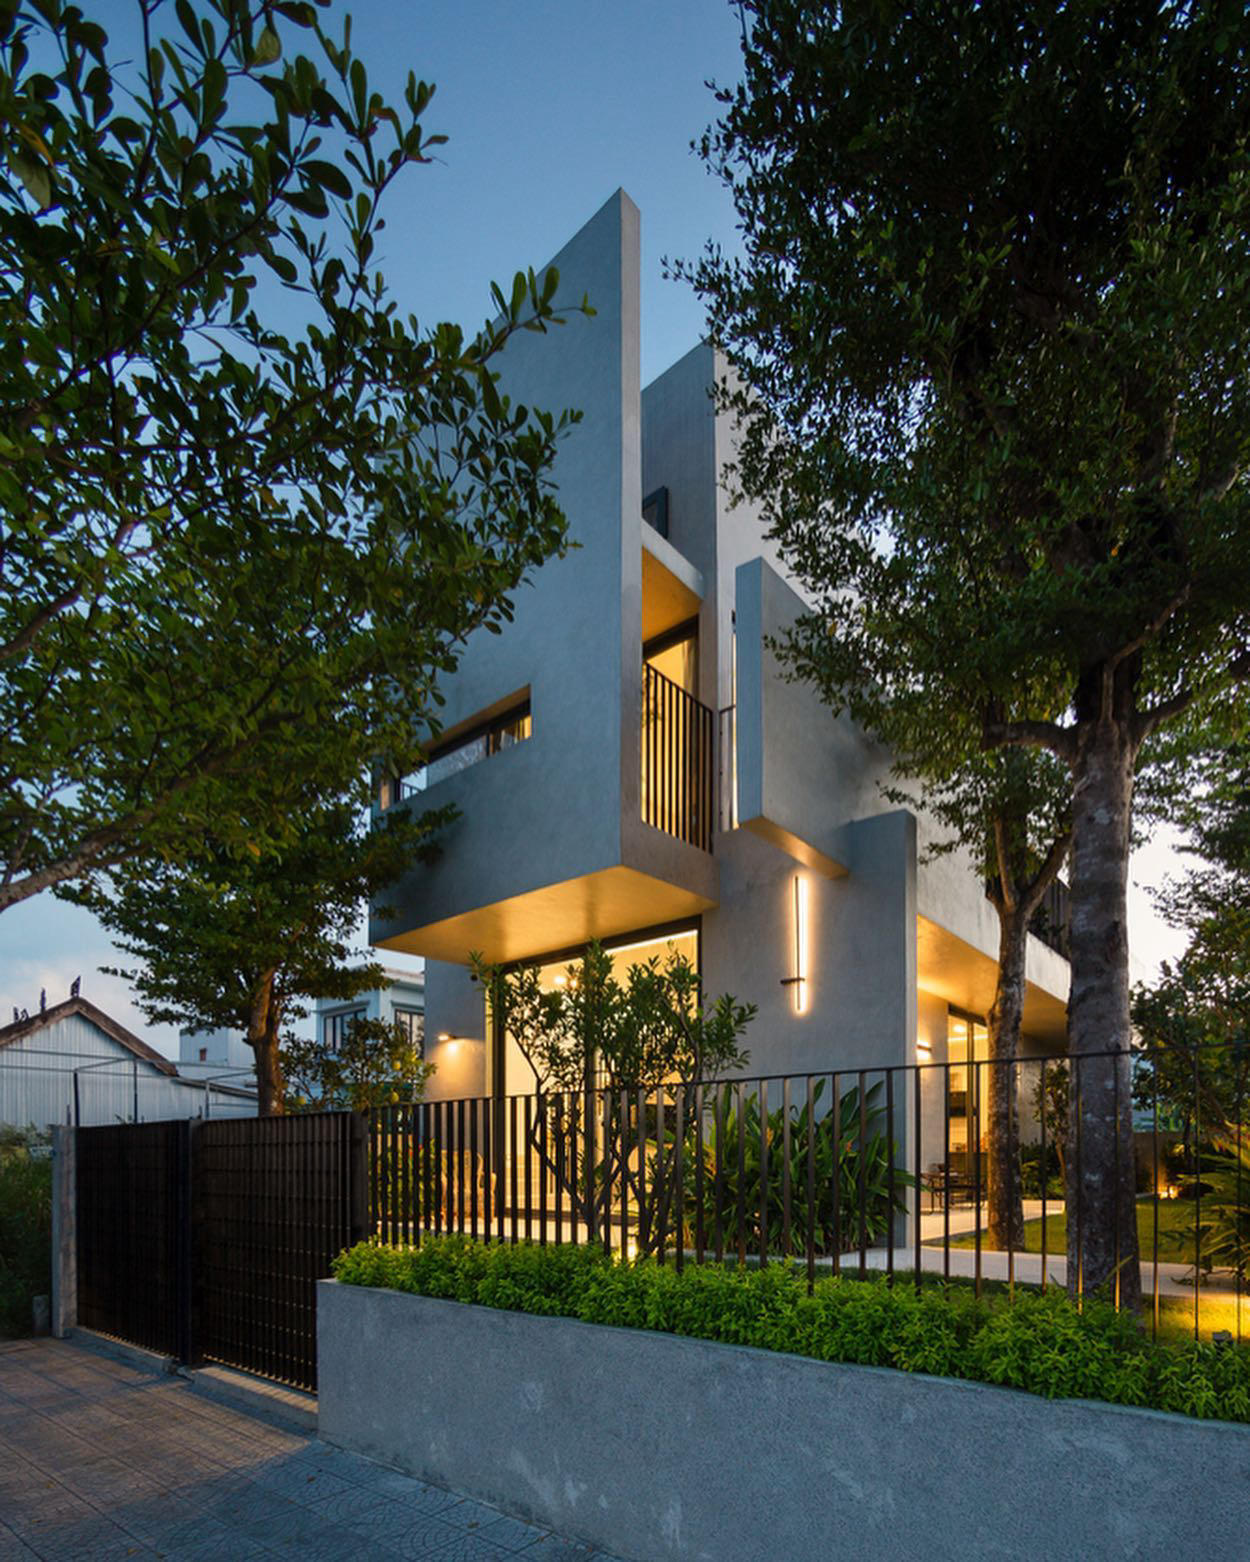 Art & Architecture - BMB House designed by Fr